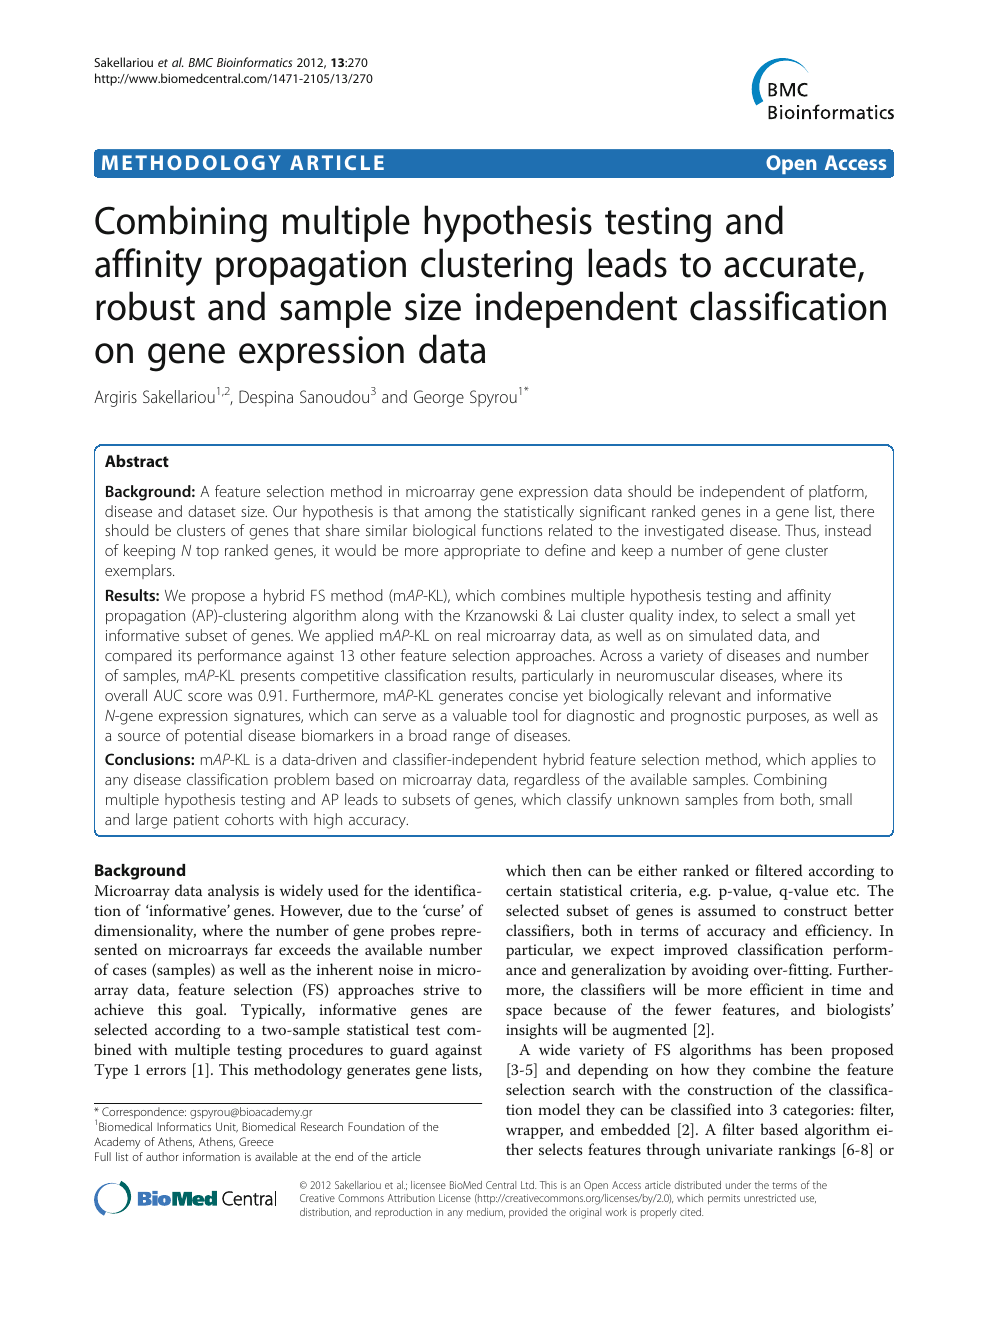 Combining multiple hypothesis testing and affinity propagation